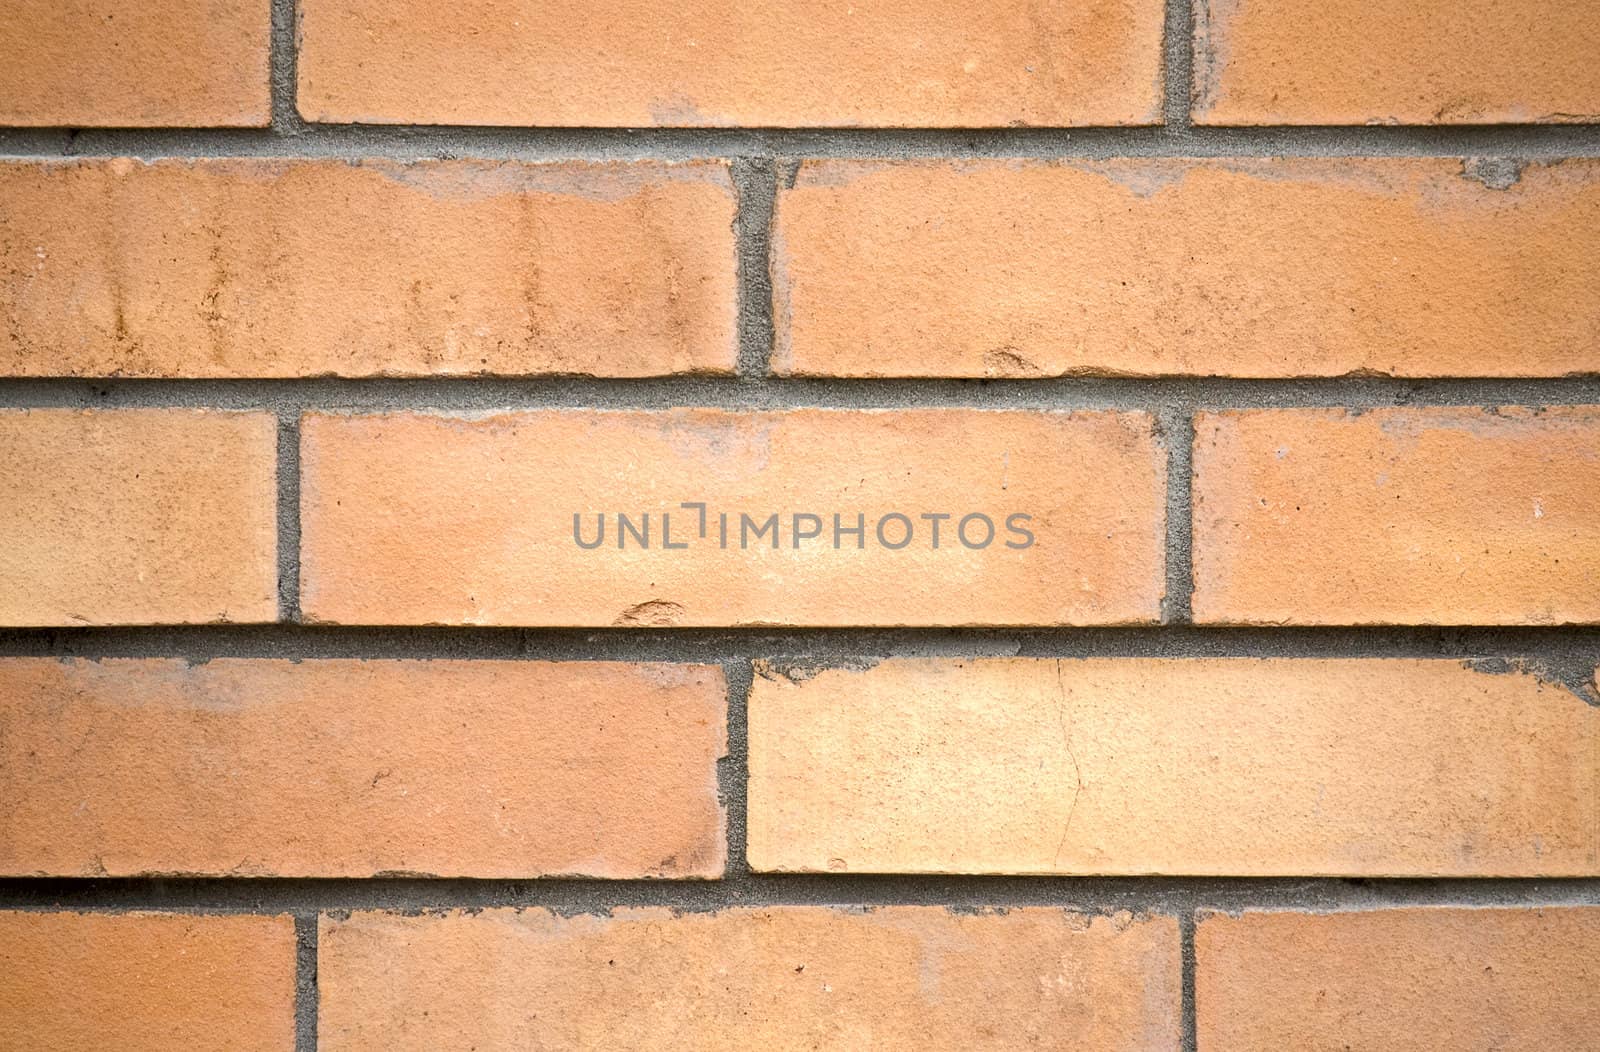 Interesting background is a wall of brown brick.